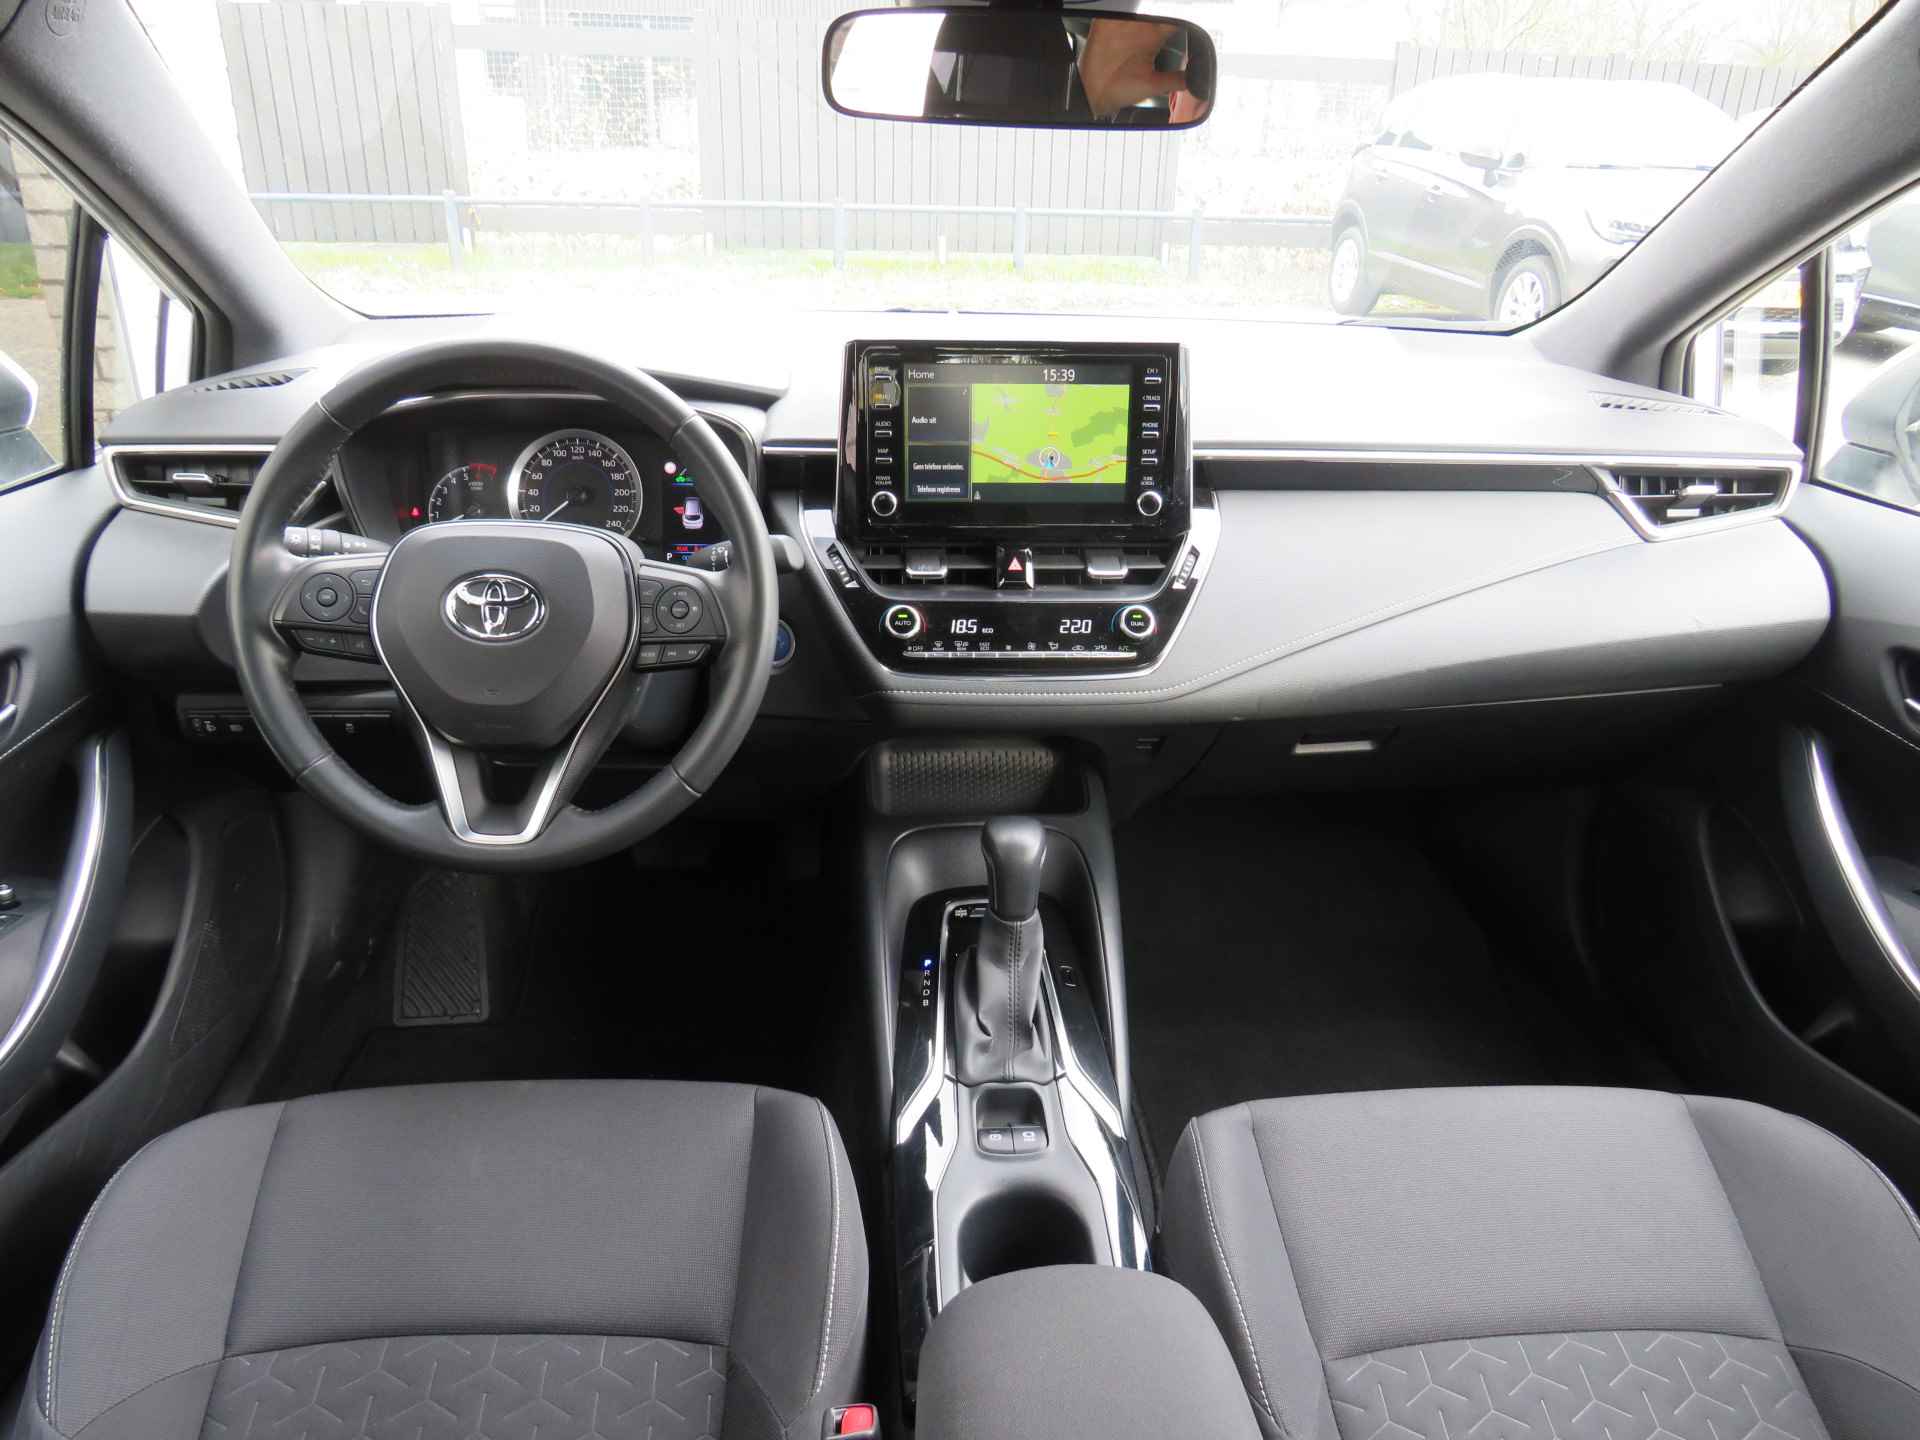 Toyota Corolla Touring Sports 1.8 Automaat Hybrid Active navi/clima/16"LM /cruise/camera - 8/32